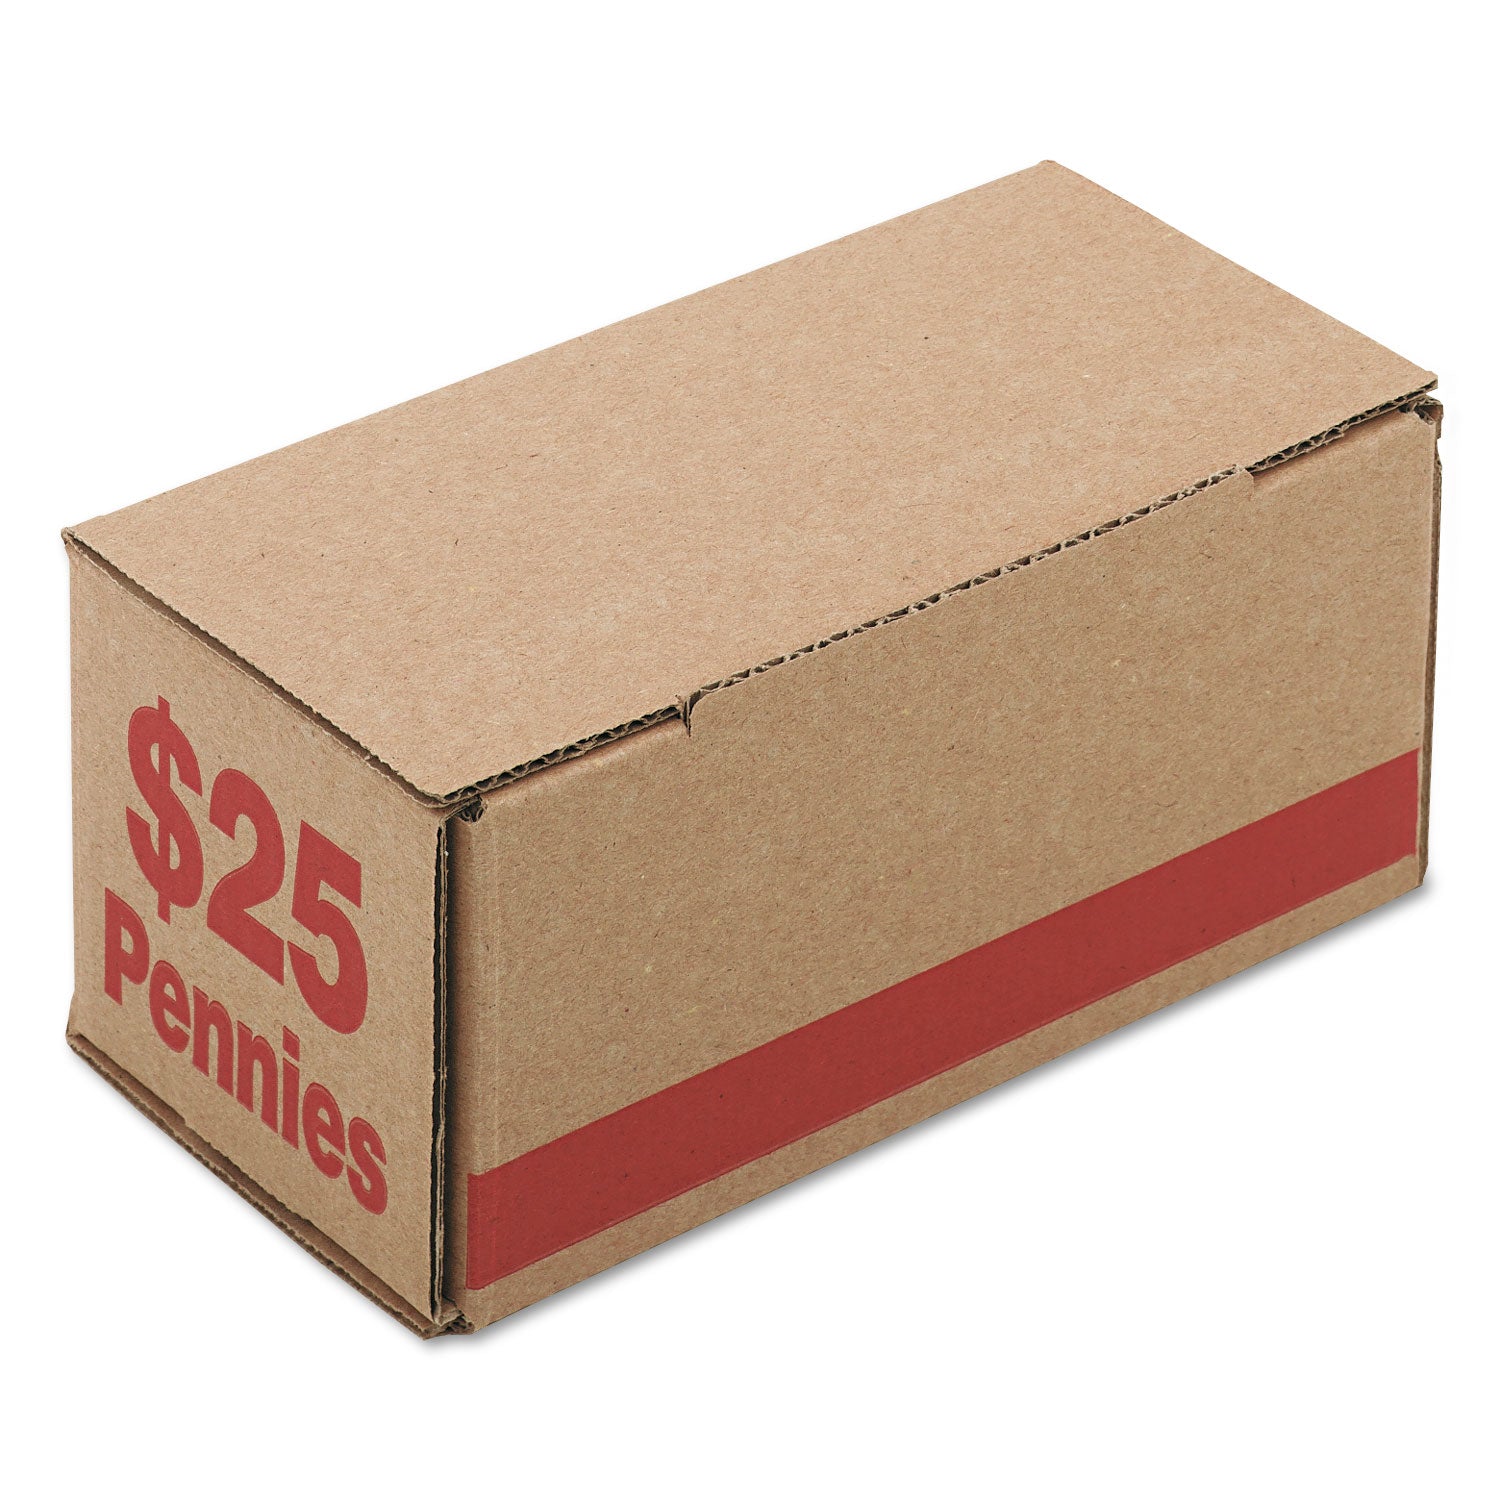 corrugated-cardboard-coin-storage-with-denomination-printed-on-side-85-x-438-x-363-red_icx94190086 - 1